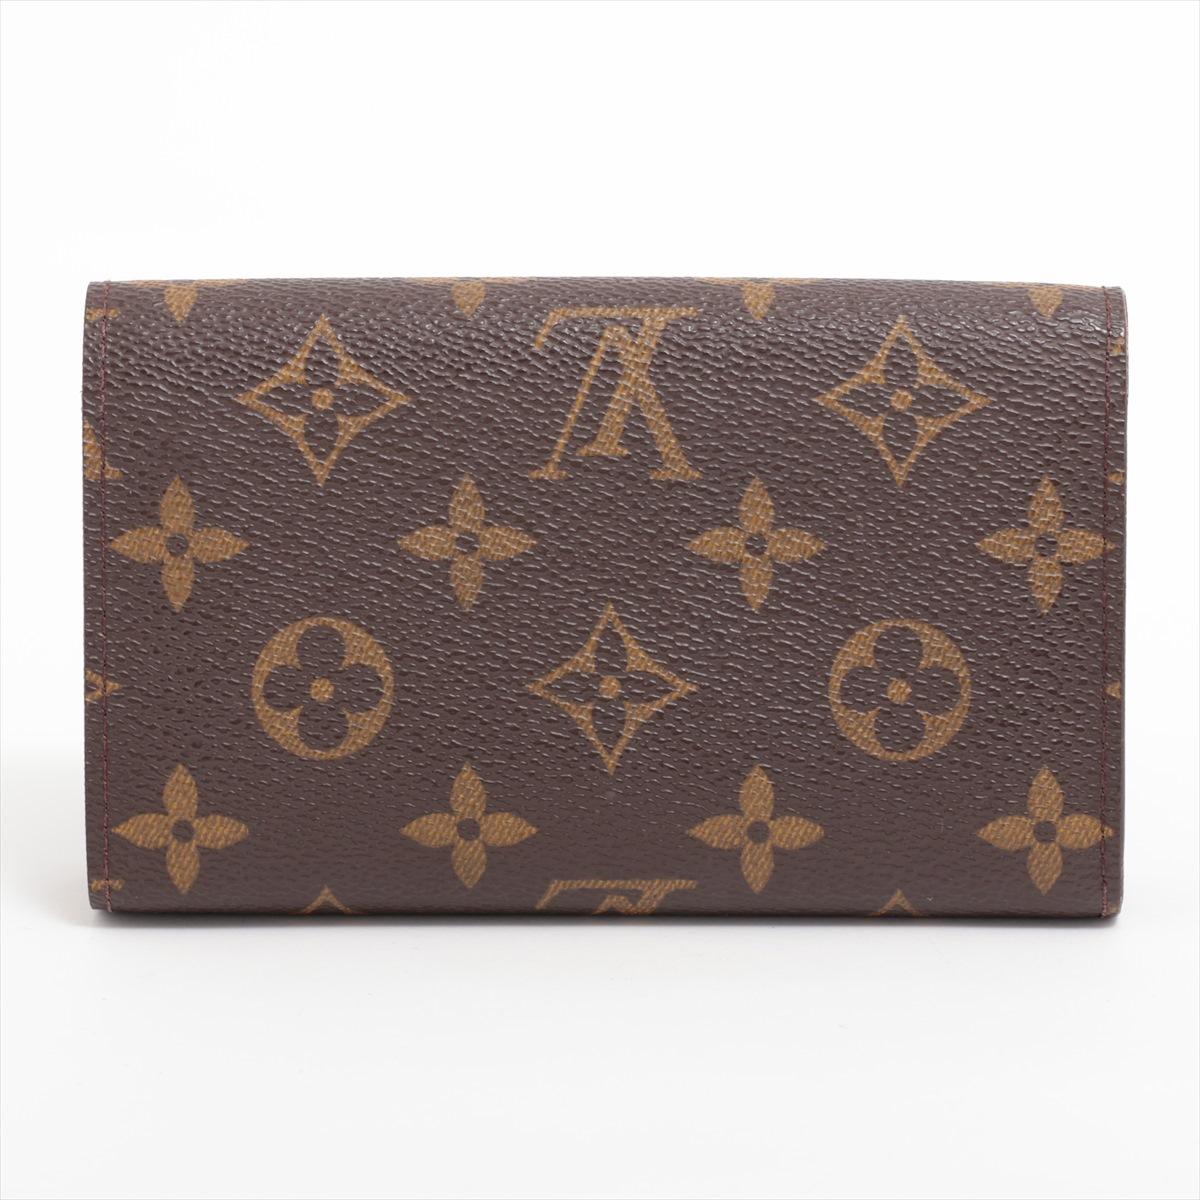 Louis Vuitton Monogram Porte Monnaie Billets Tresor Wallet In Good Condition For Sale In Indianapolis, IN